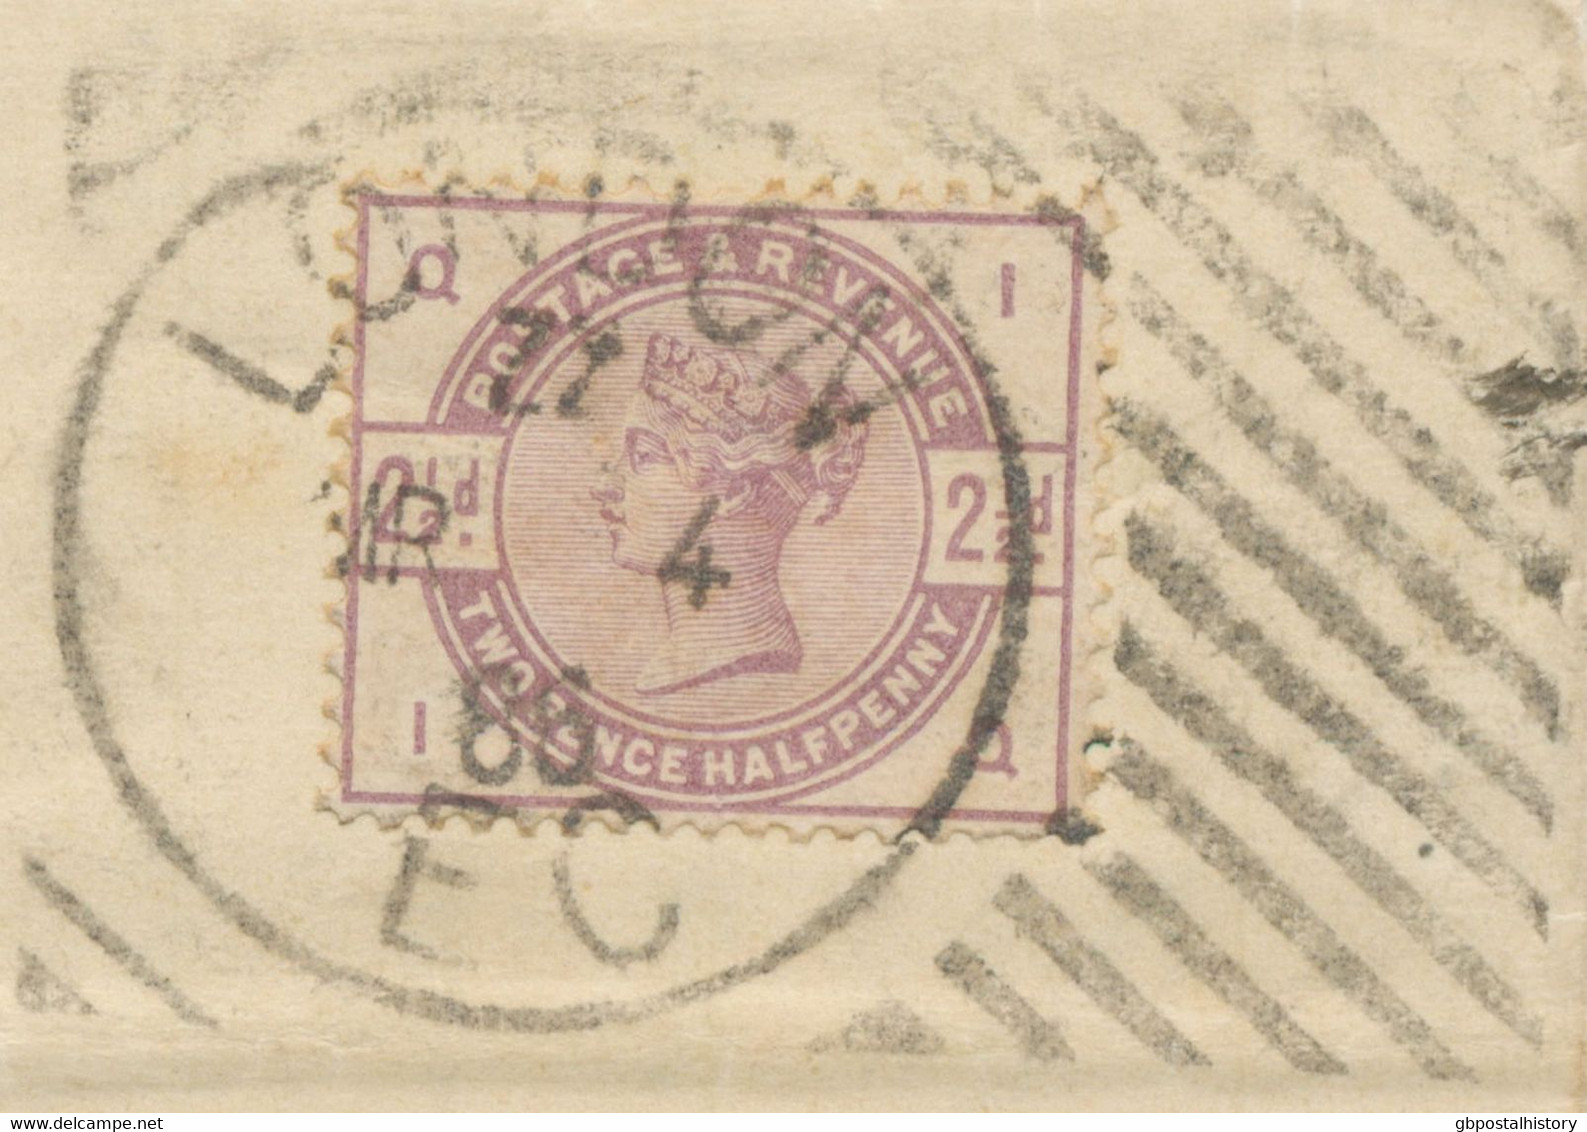 GB „LONDON / EC“ Scarce Experimental Hoster Postmark On Superb Entire With QV 2 ½d Lilac To SPAIN, R! - Briefe U. Dokumente